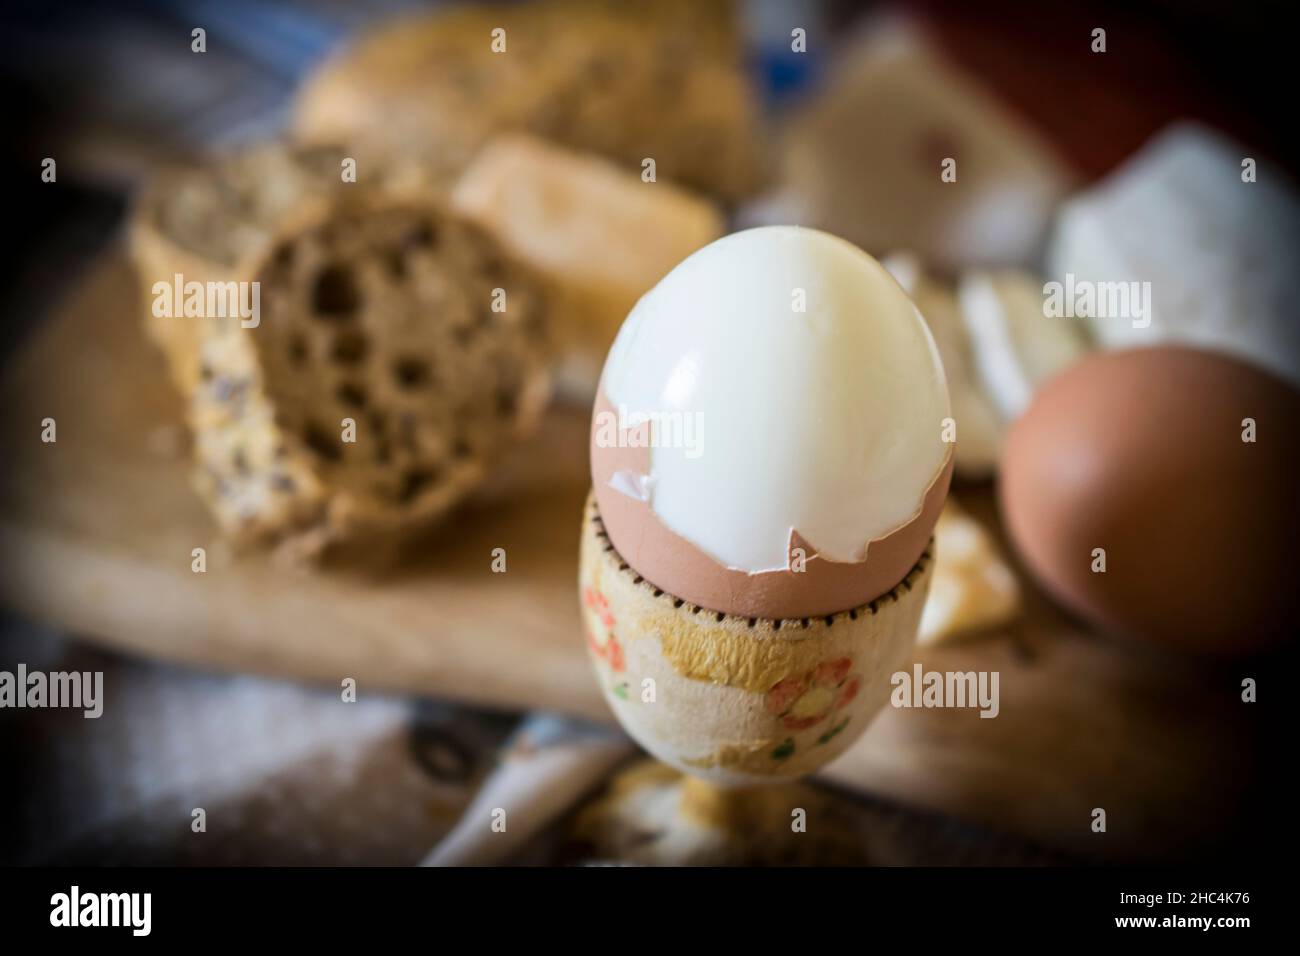 A rustic breakfast with boiled eggs and bread Stock Photo